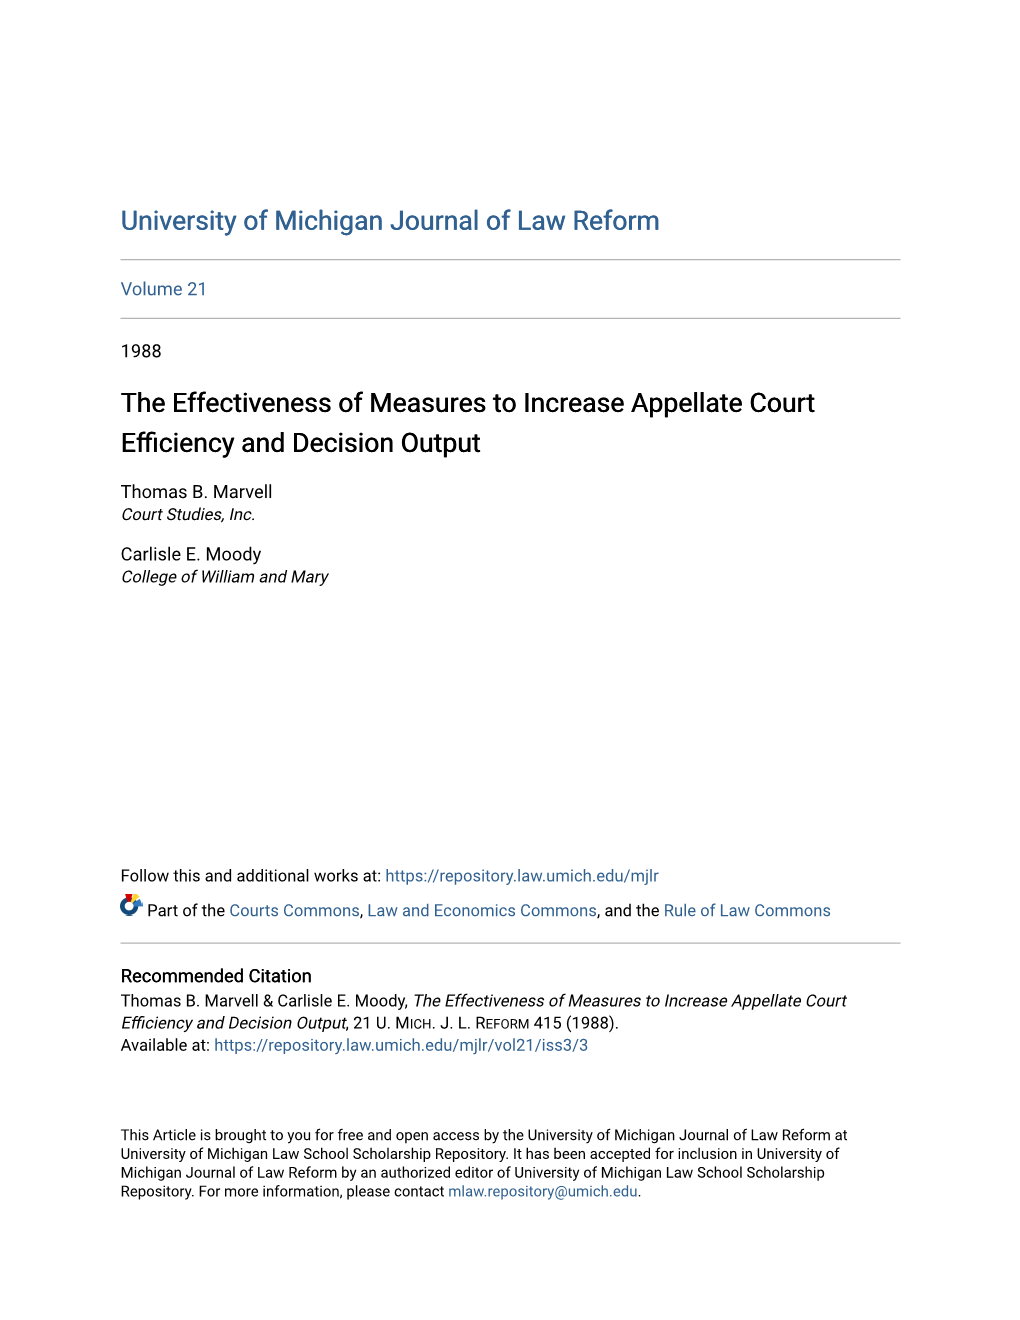 The Effectiveness of Measures to Increase Appellate Court Efficiency and Decision Output